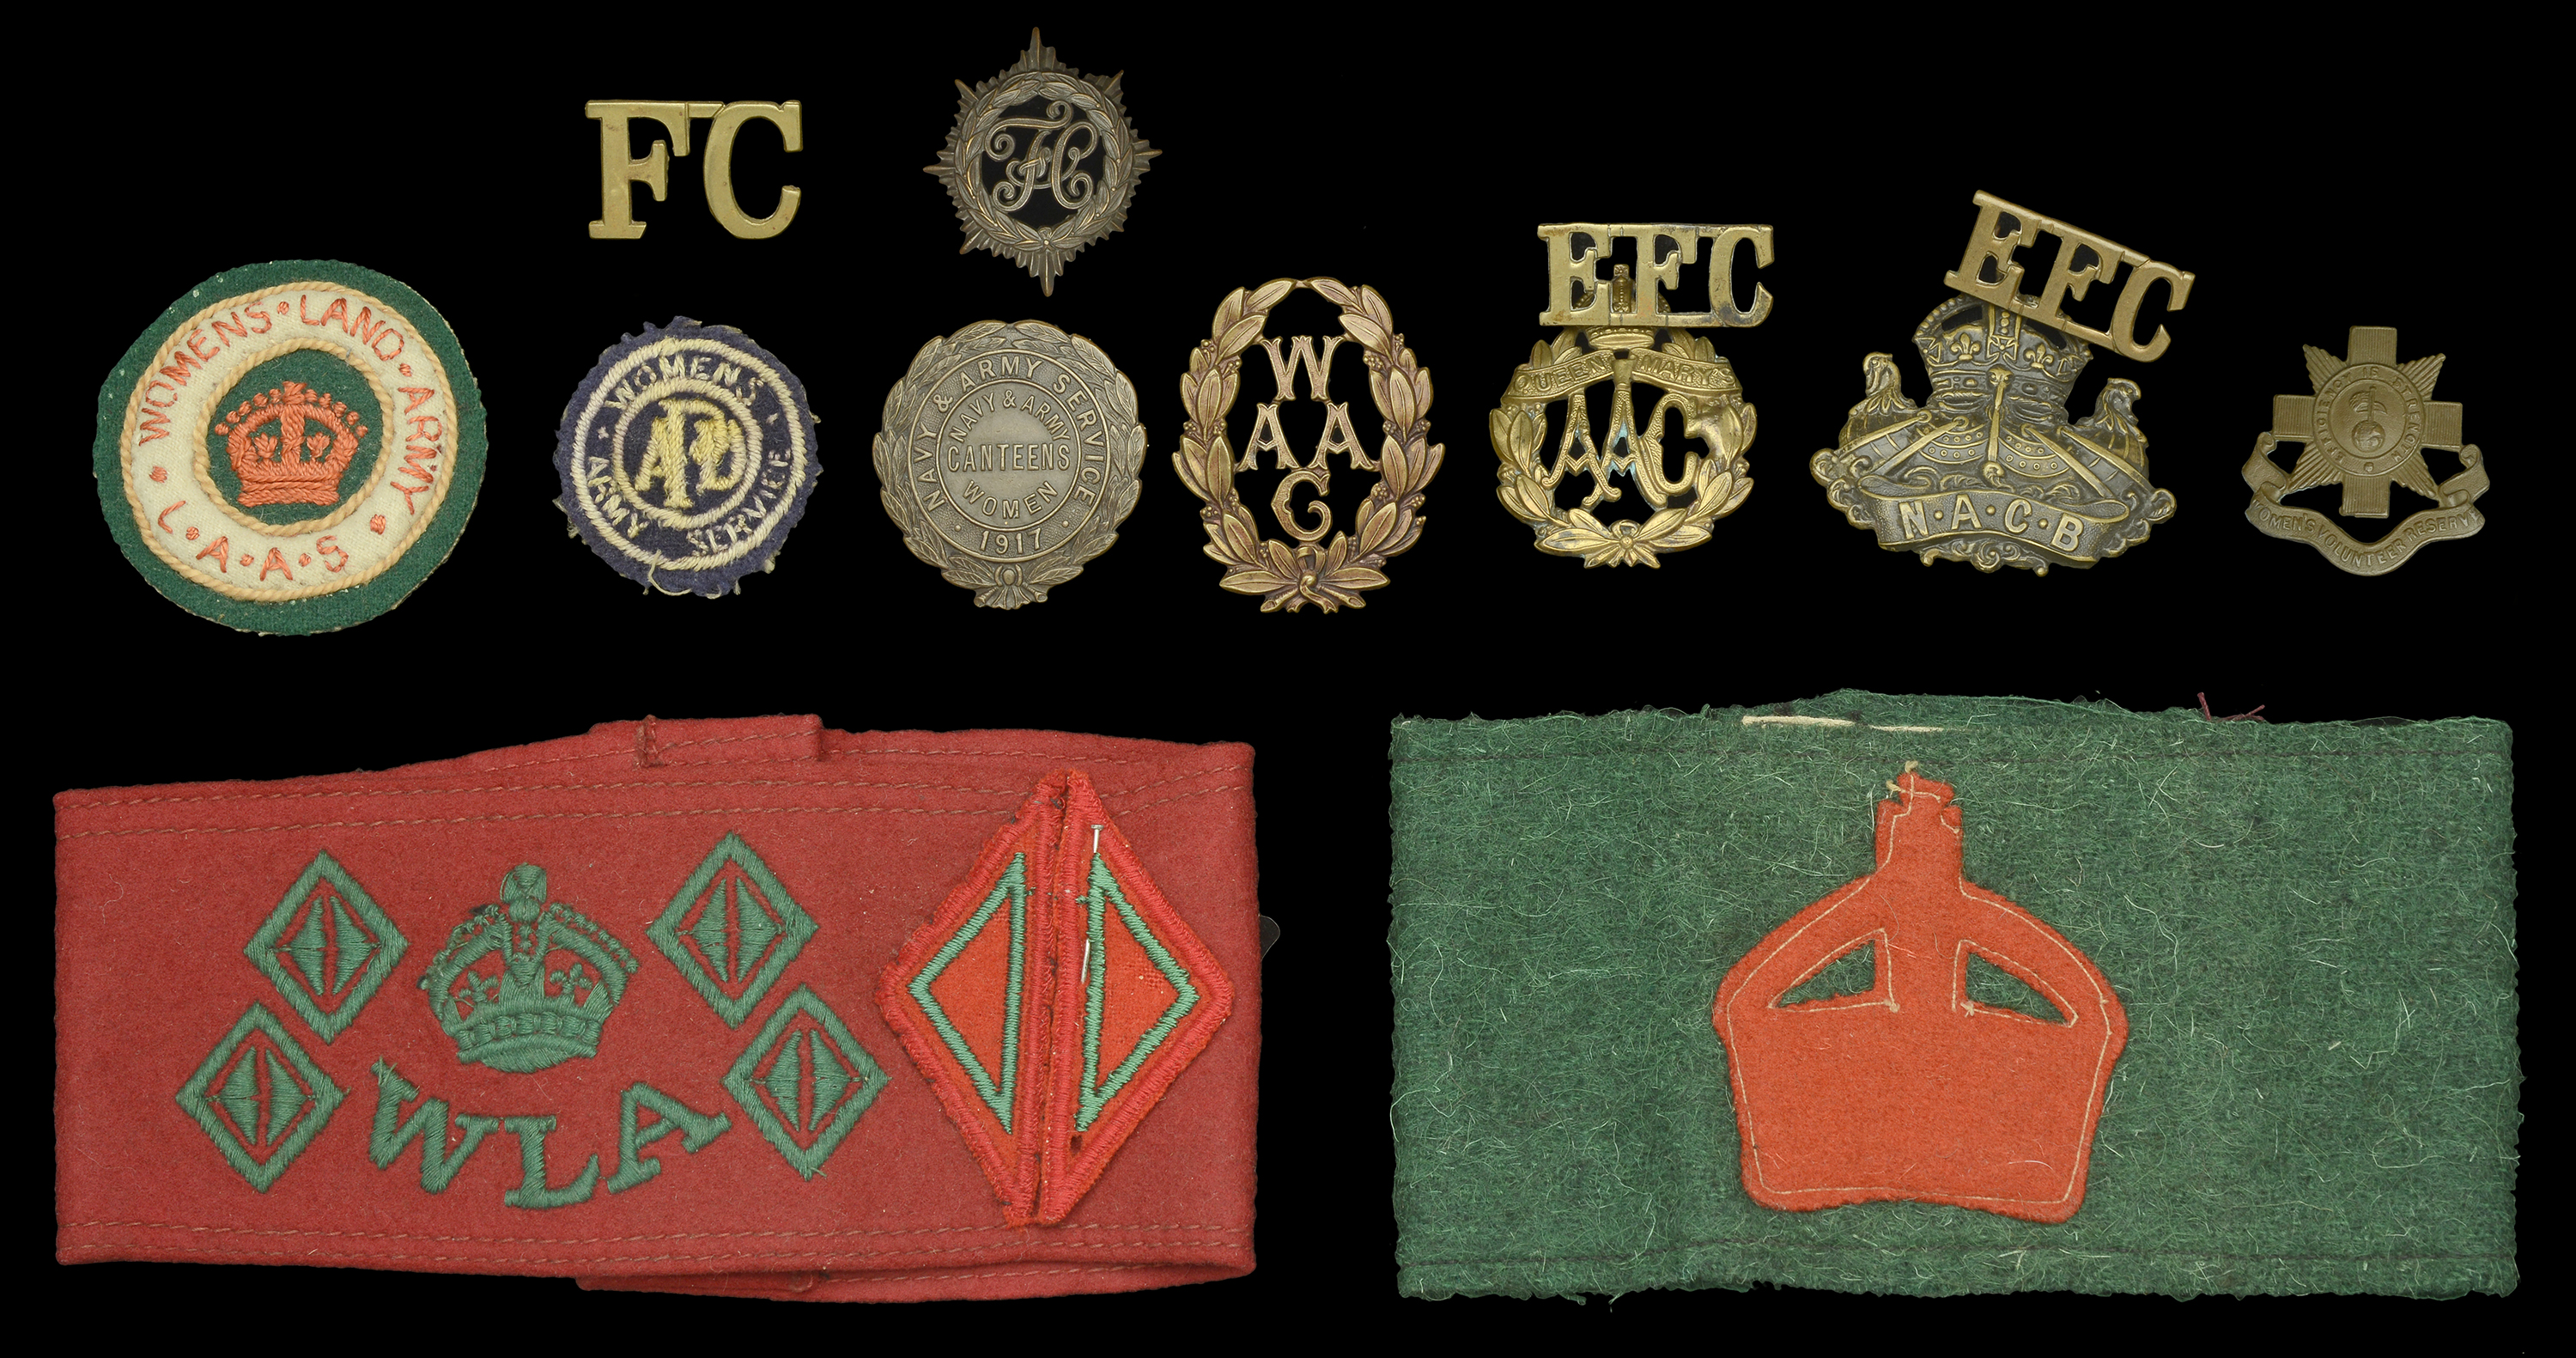 Miscellaneous Women's Services Insignia. A good selection of cap badges to the Women's Serv...